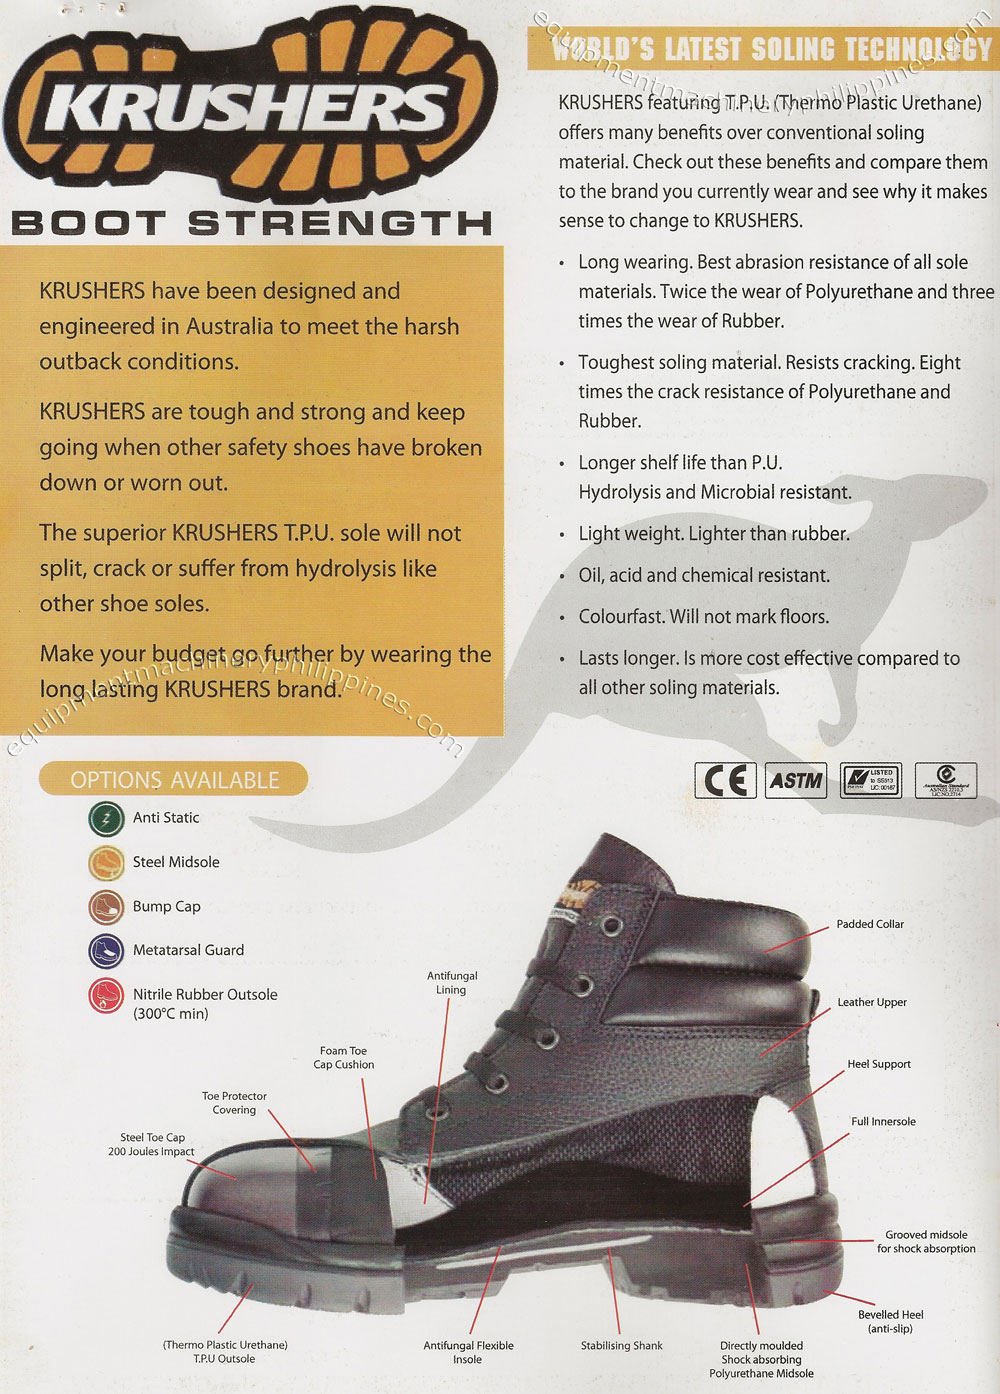 Krushers Industrial Safety Shoes Features